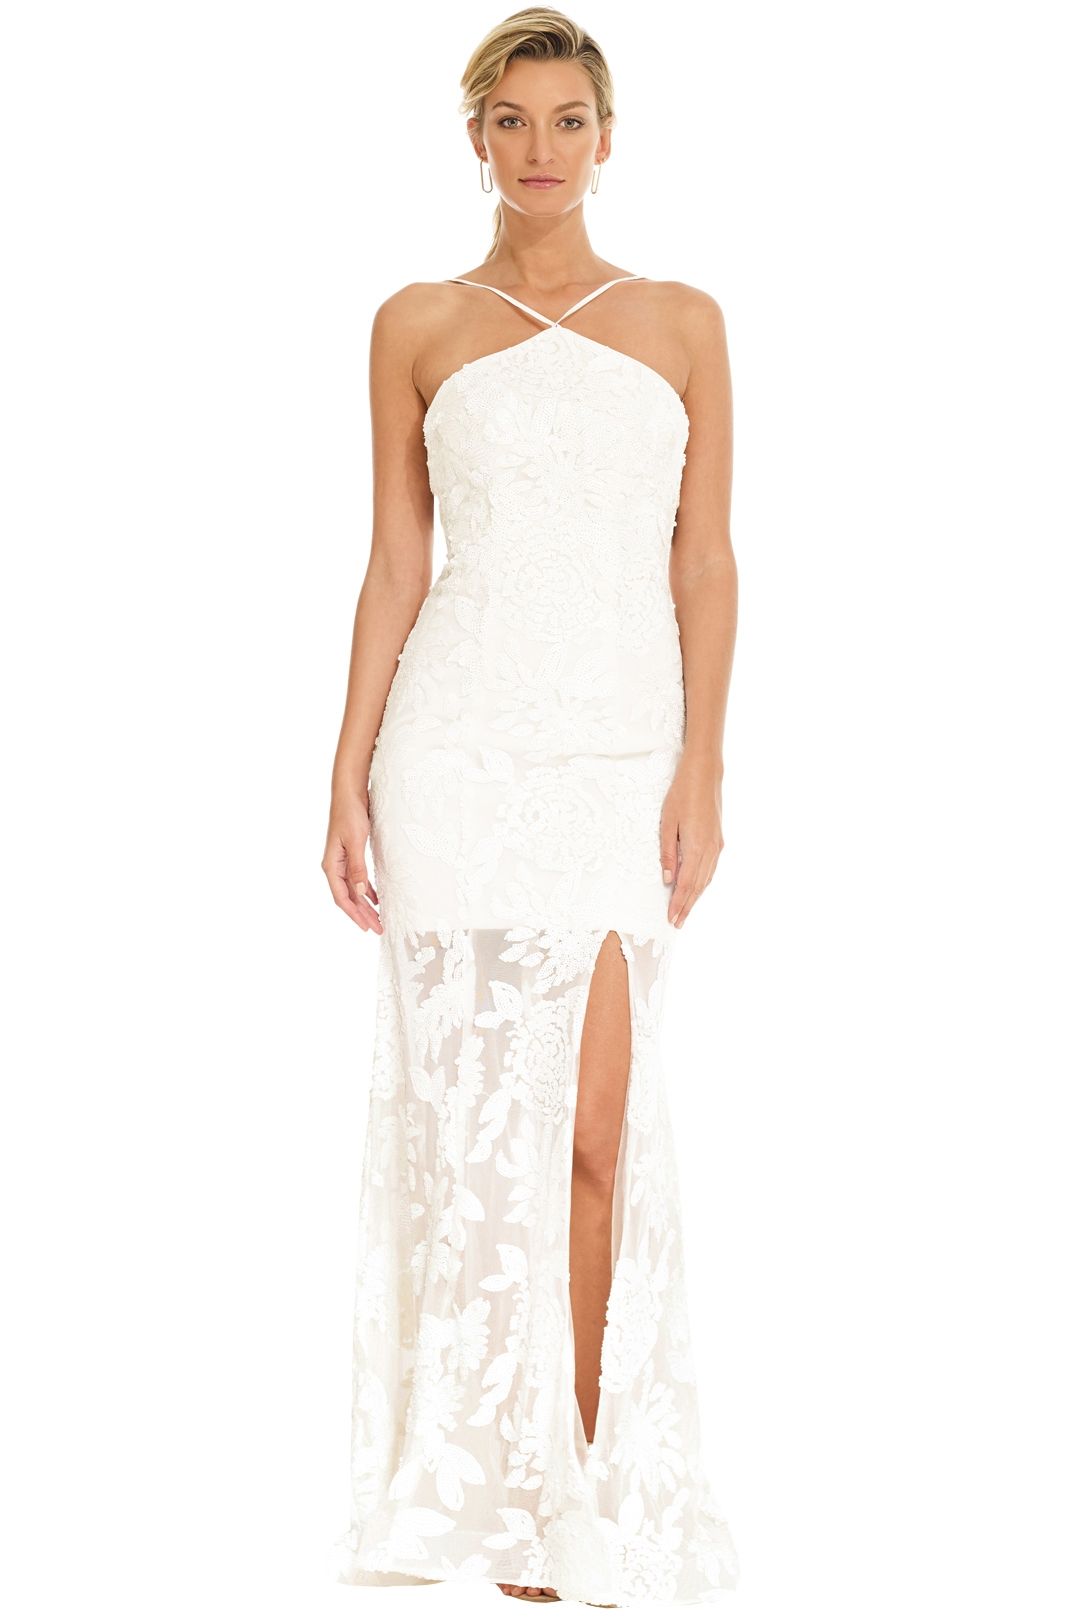 Tinaholy - White Halter Gown - Front